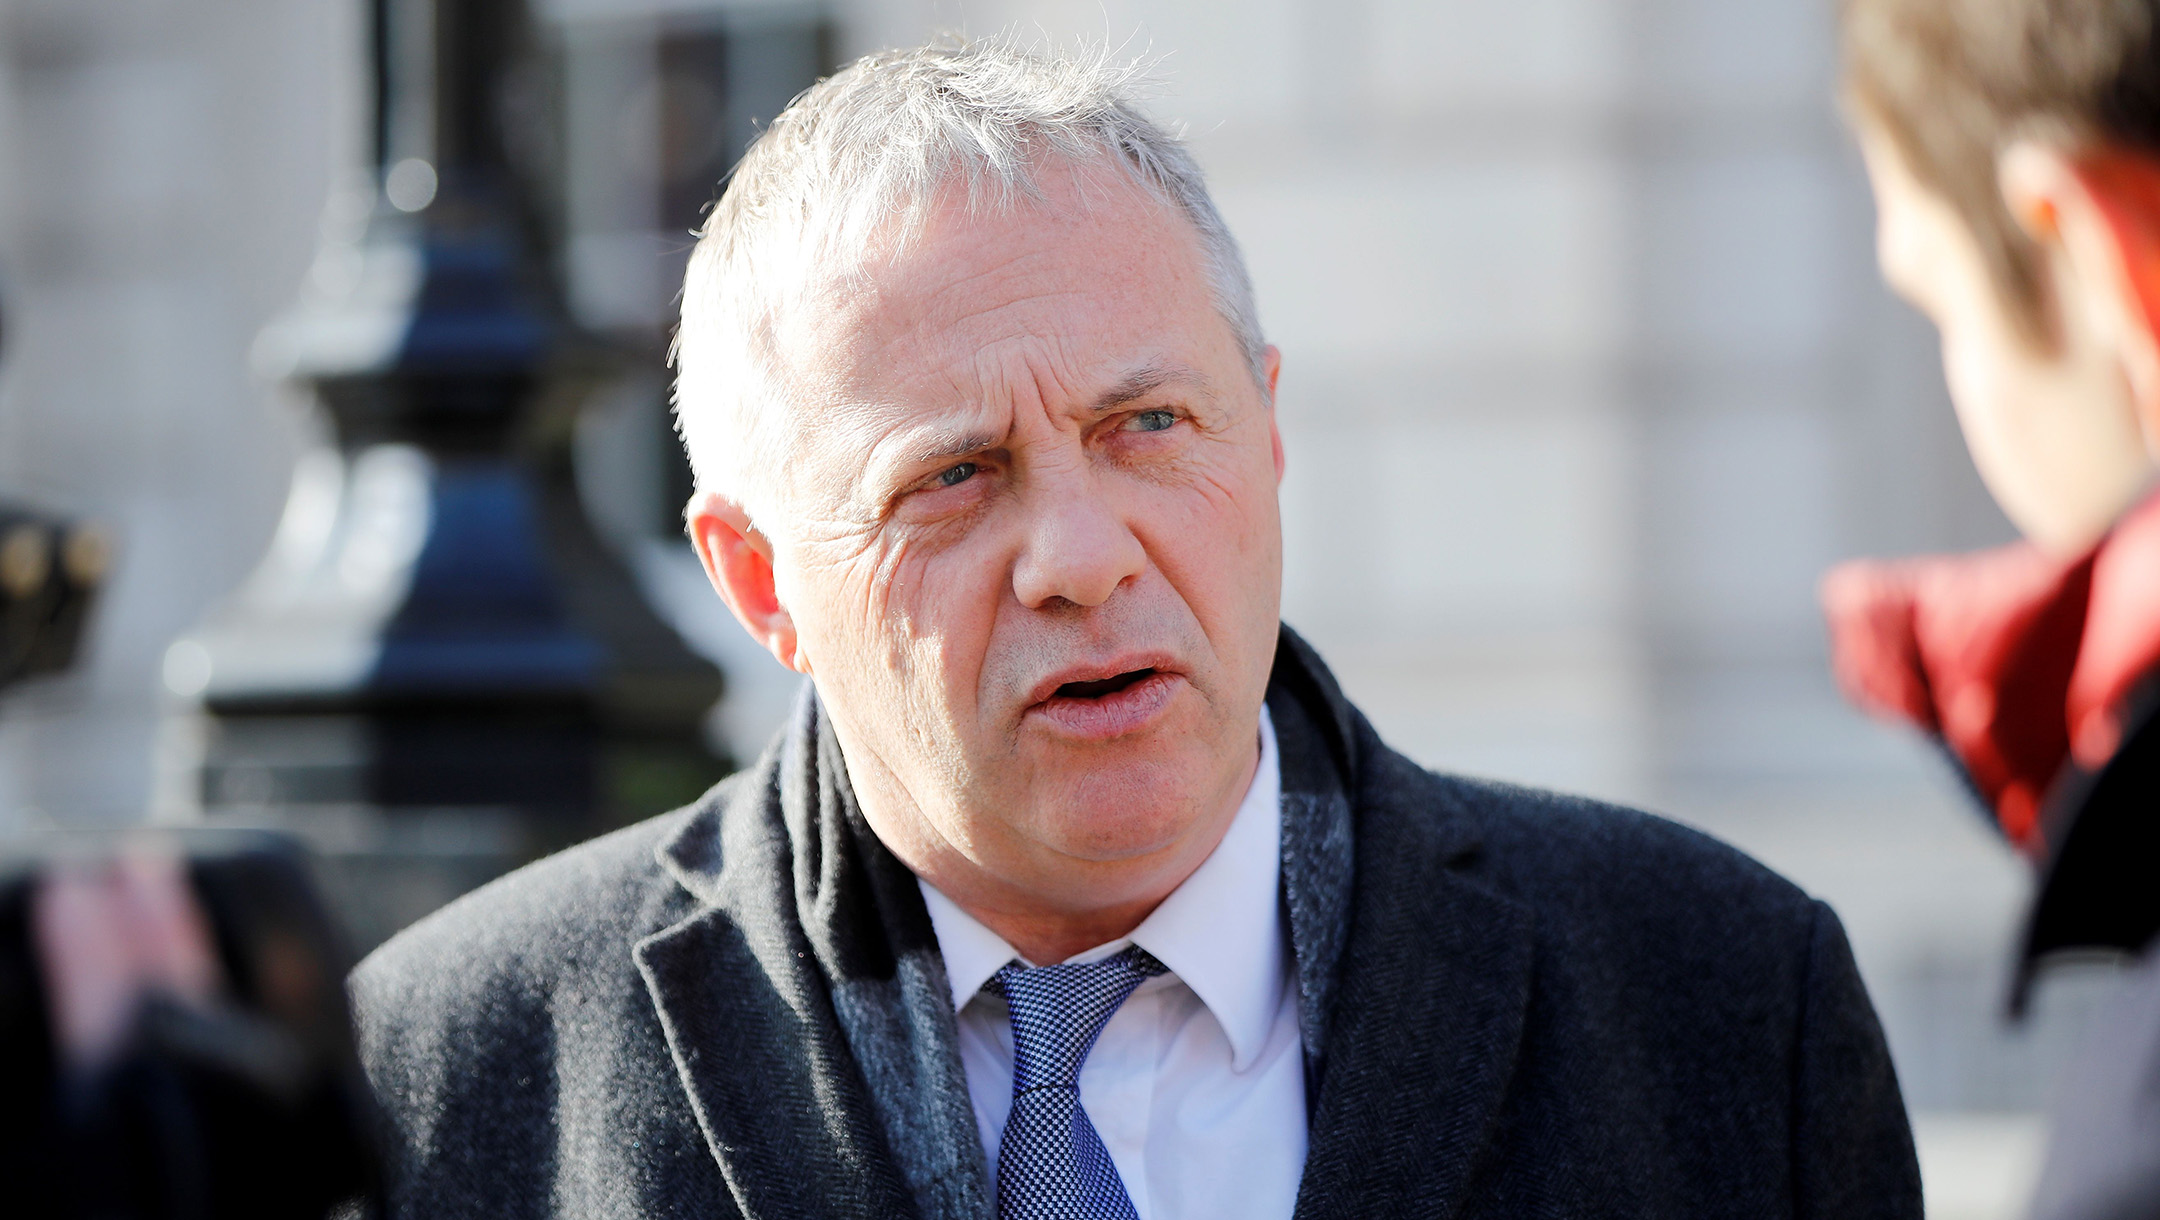 John Mann leaves the Cabinet Office on Whitehall, in central London, the United Kingdom on January 31, 2019. (Tolga Akmen / AFP via Getty Images)